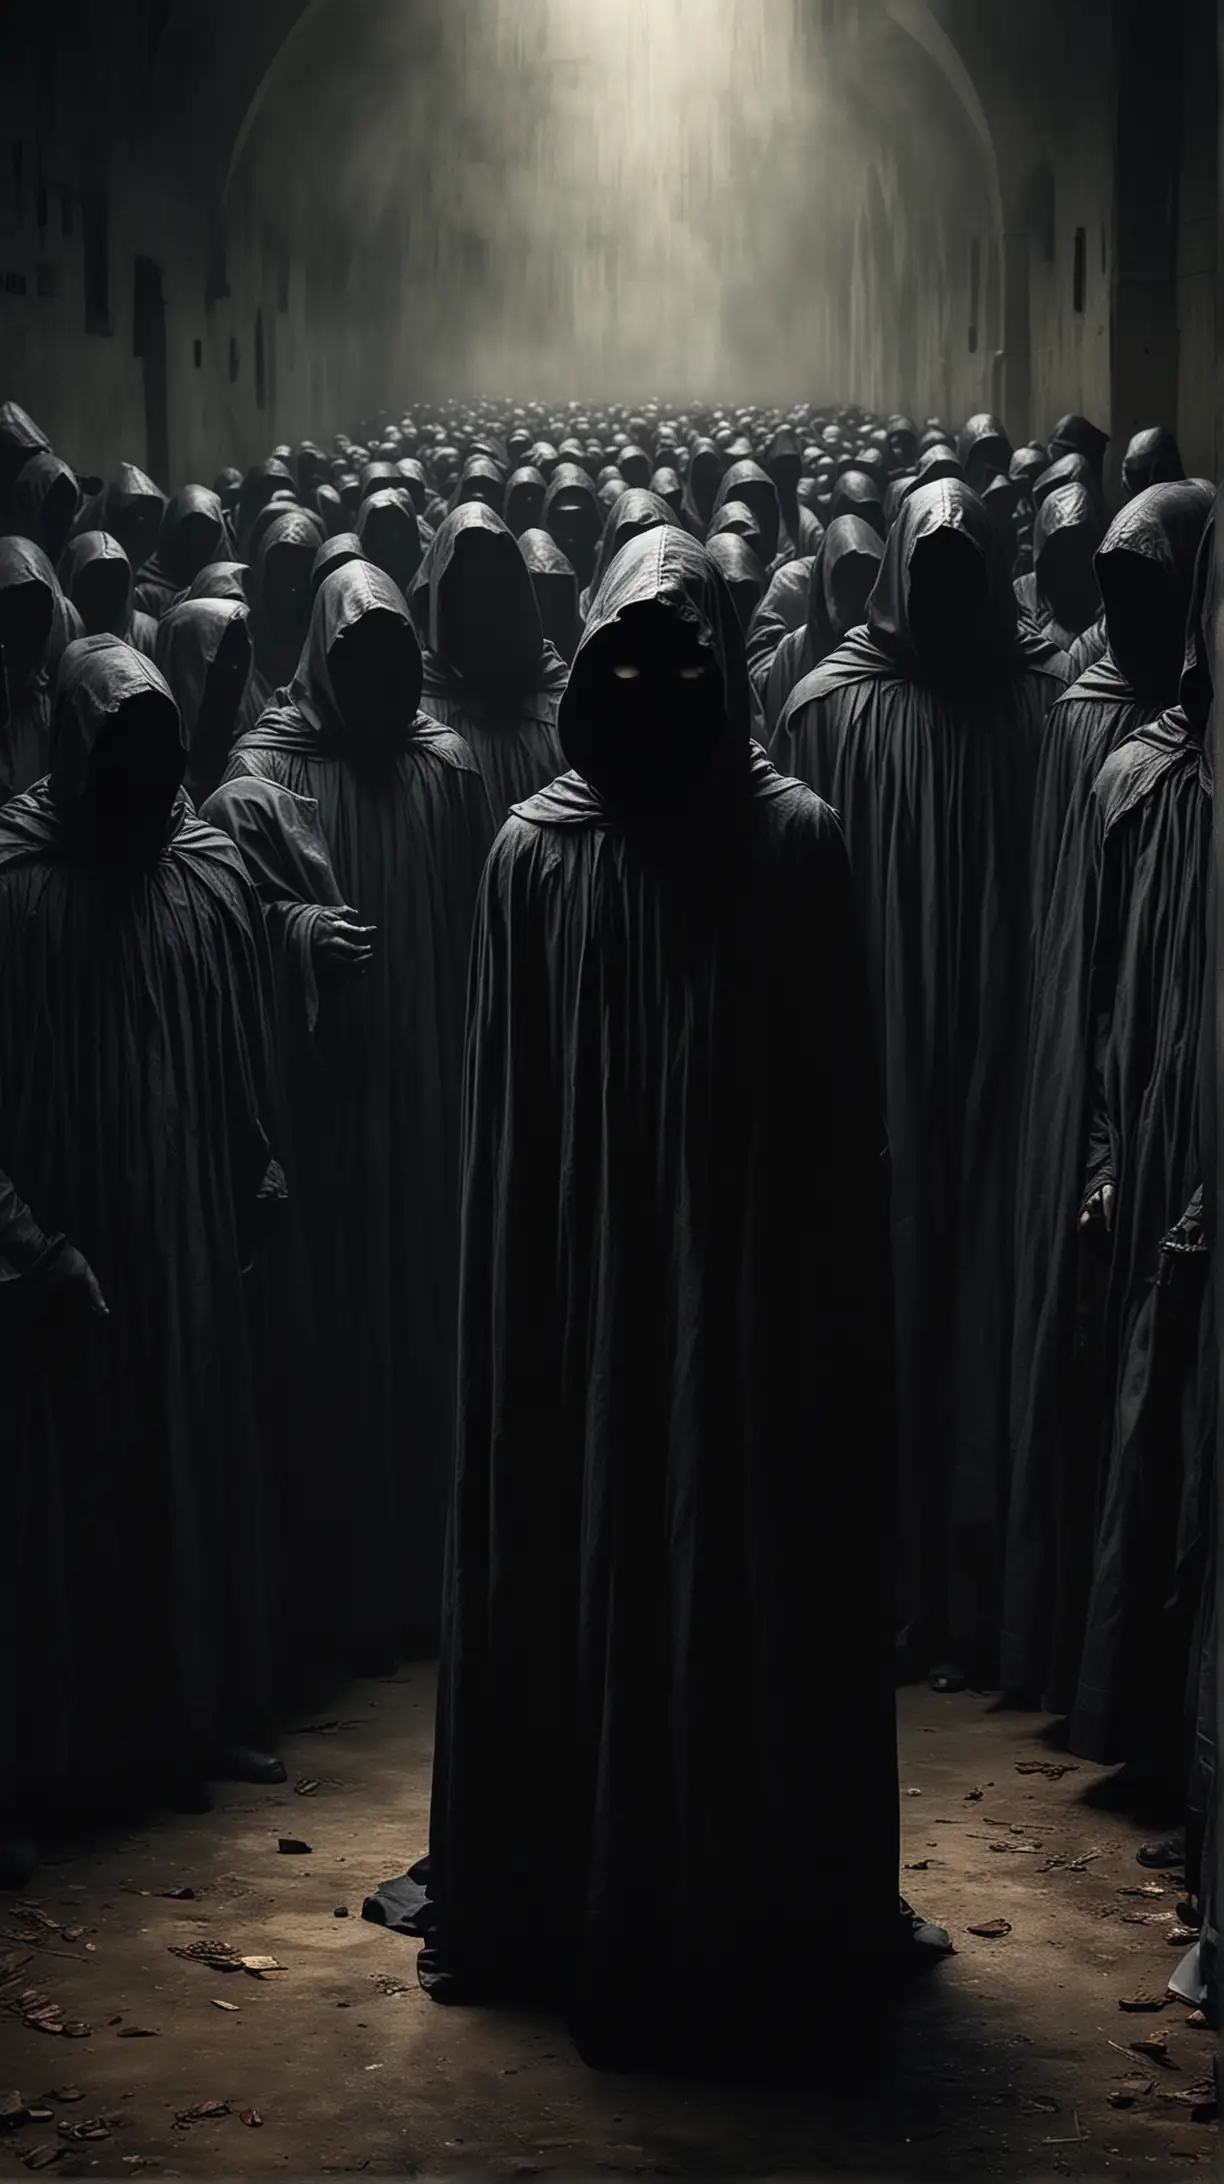 Dark, Shadowy Figure: The figure could be depicted wearing a cloak or hood, with their face obscured, and casting a menacing shadow over a group of people below. This image symbolizes the omnipresent fear and uncertainty faced by those accused of being enemies of the people. Hyper realistic.